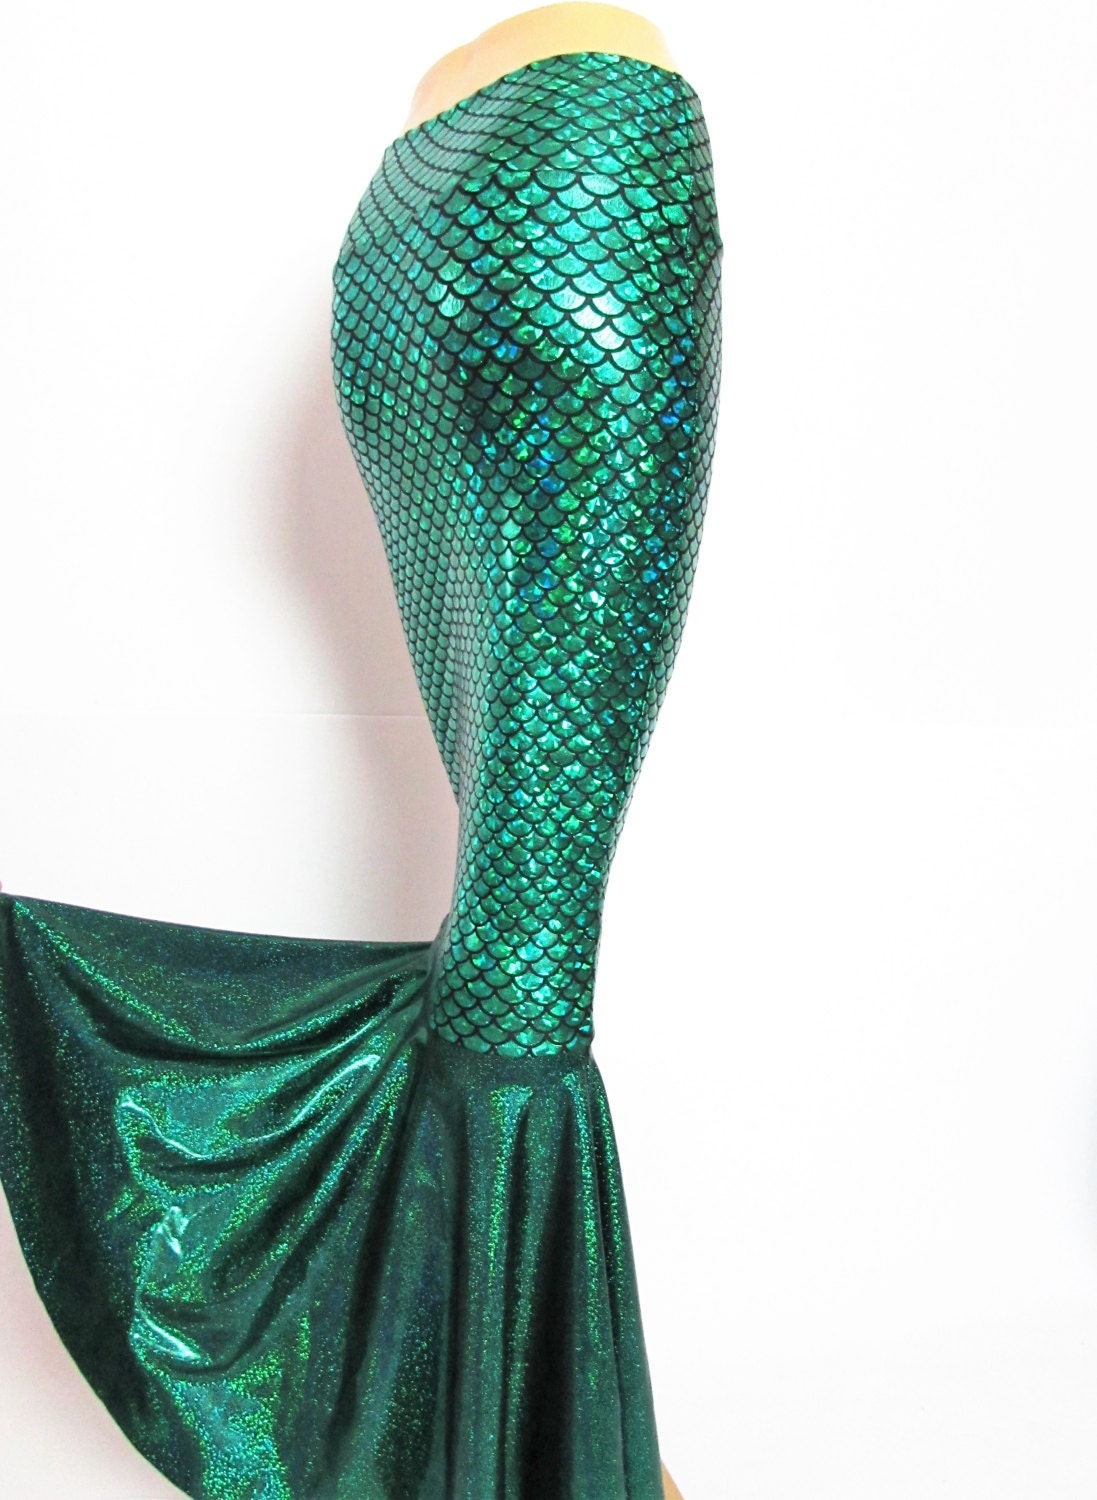 Green Mermaid skirt Stretch Scales print Costume Party